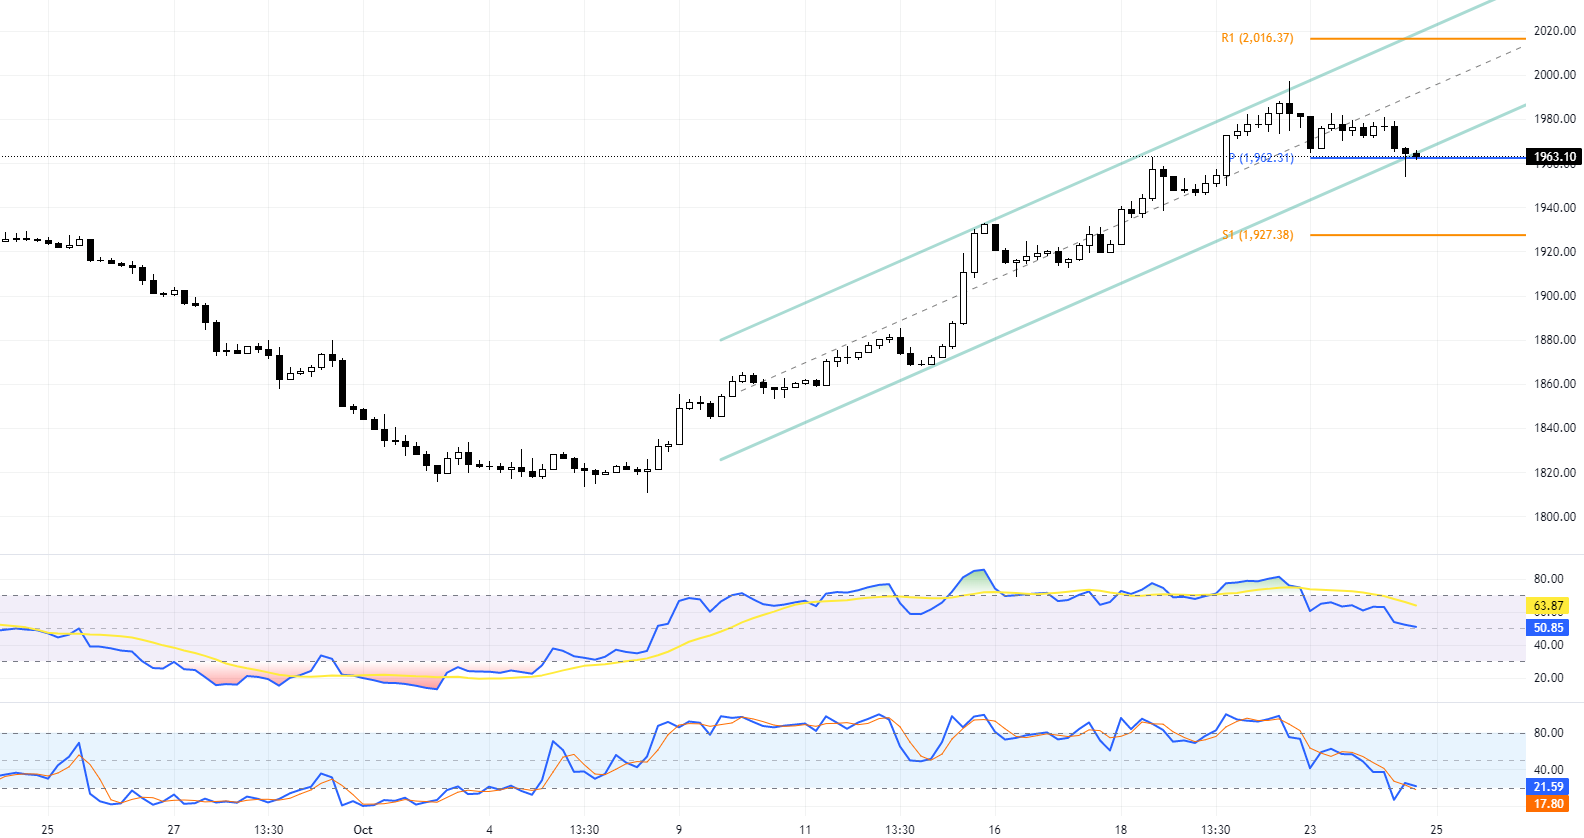 Gold Stock Forecast - XAU Tests $1949 Support